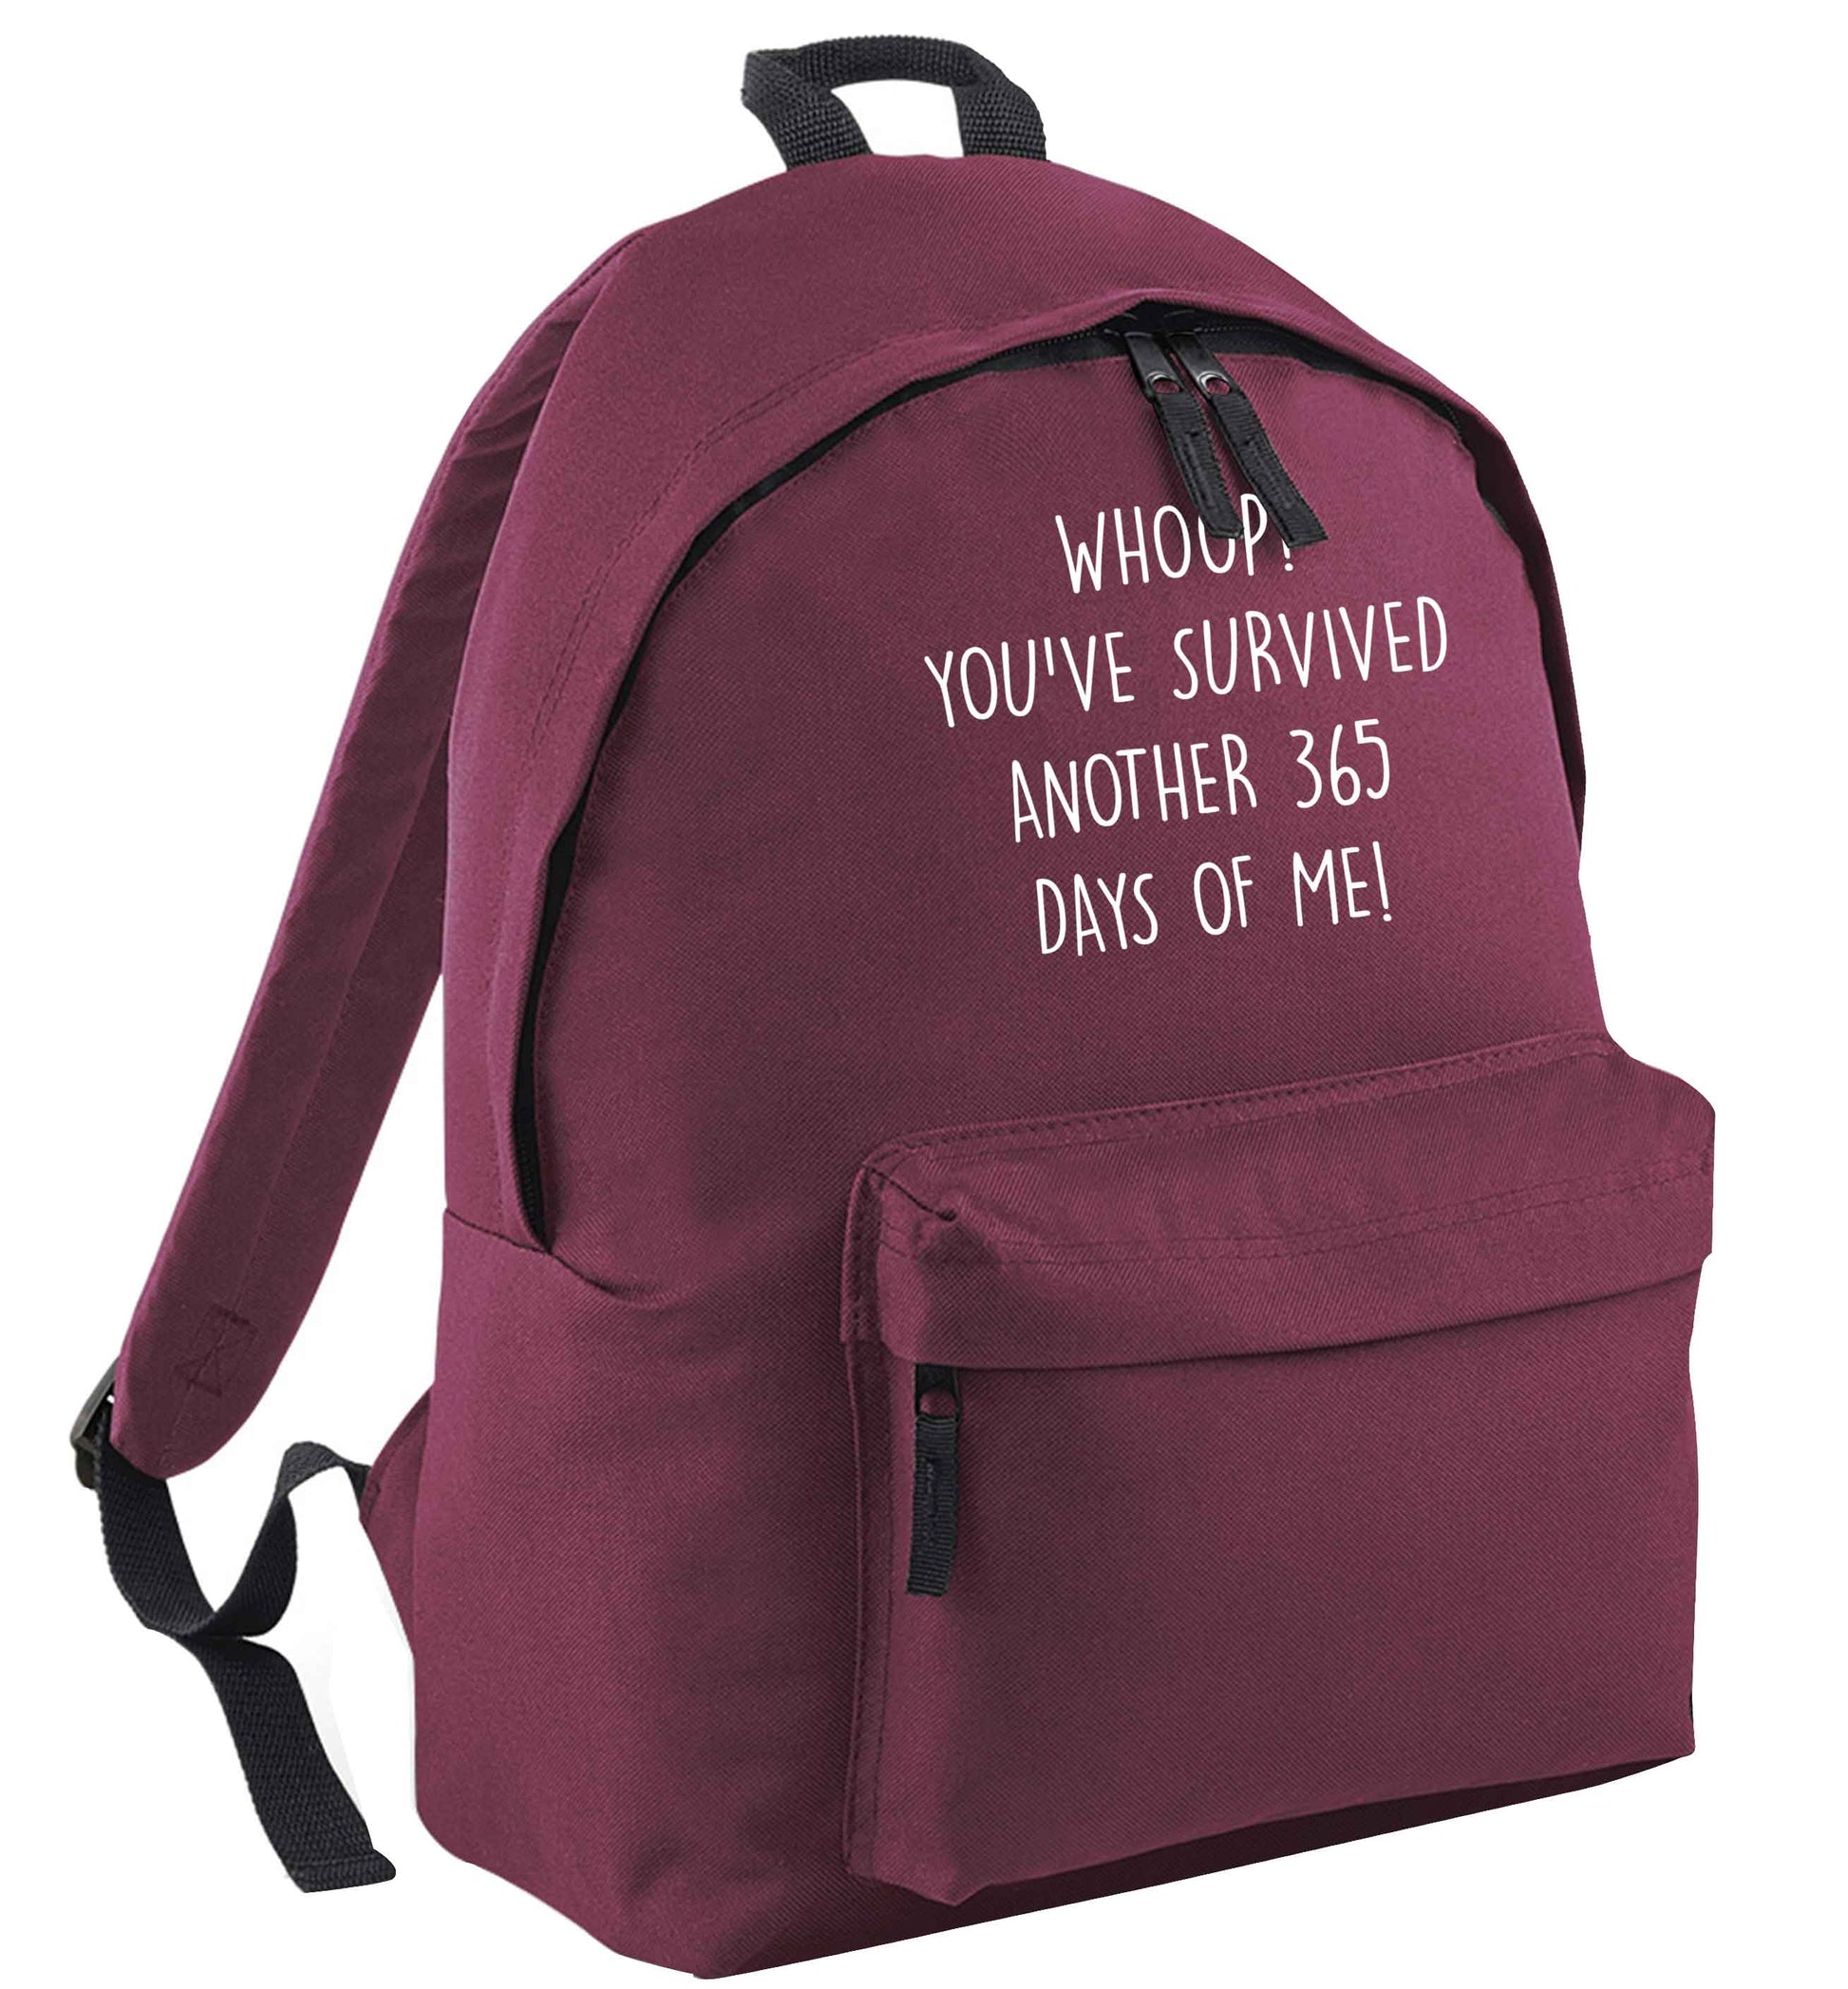 Whoop! You've survived another 365 days with me! maroon adults backpack